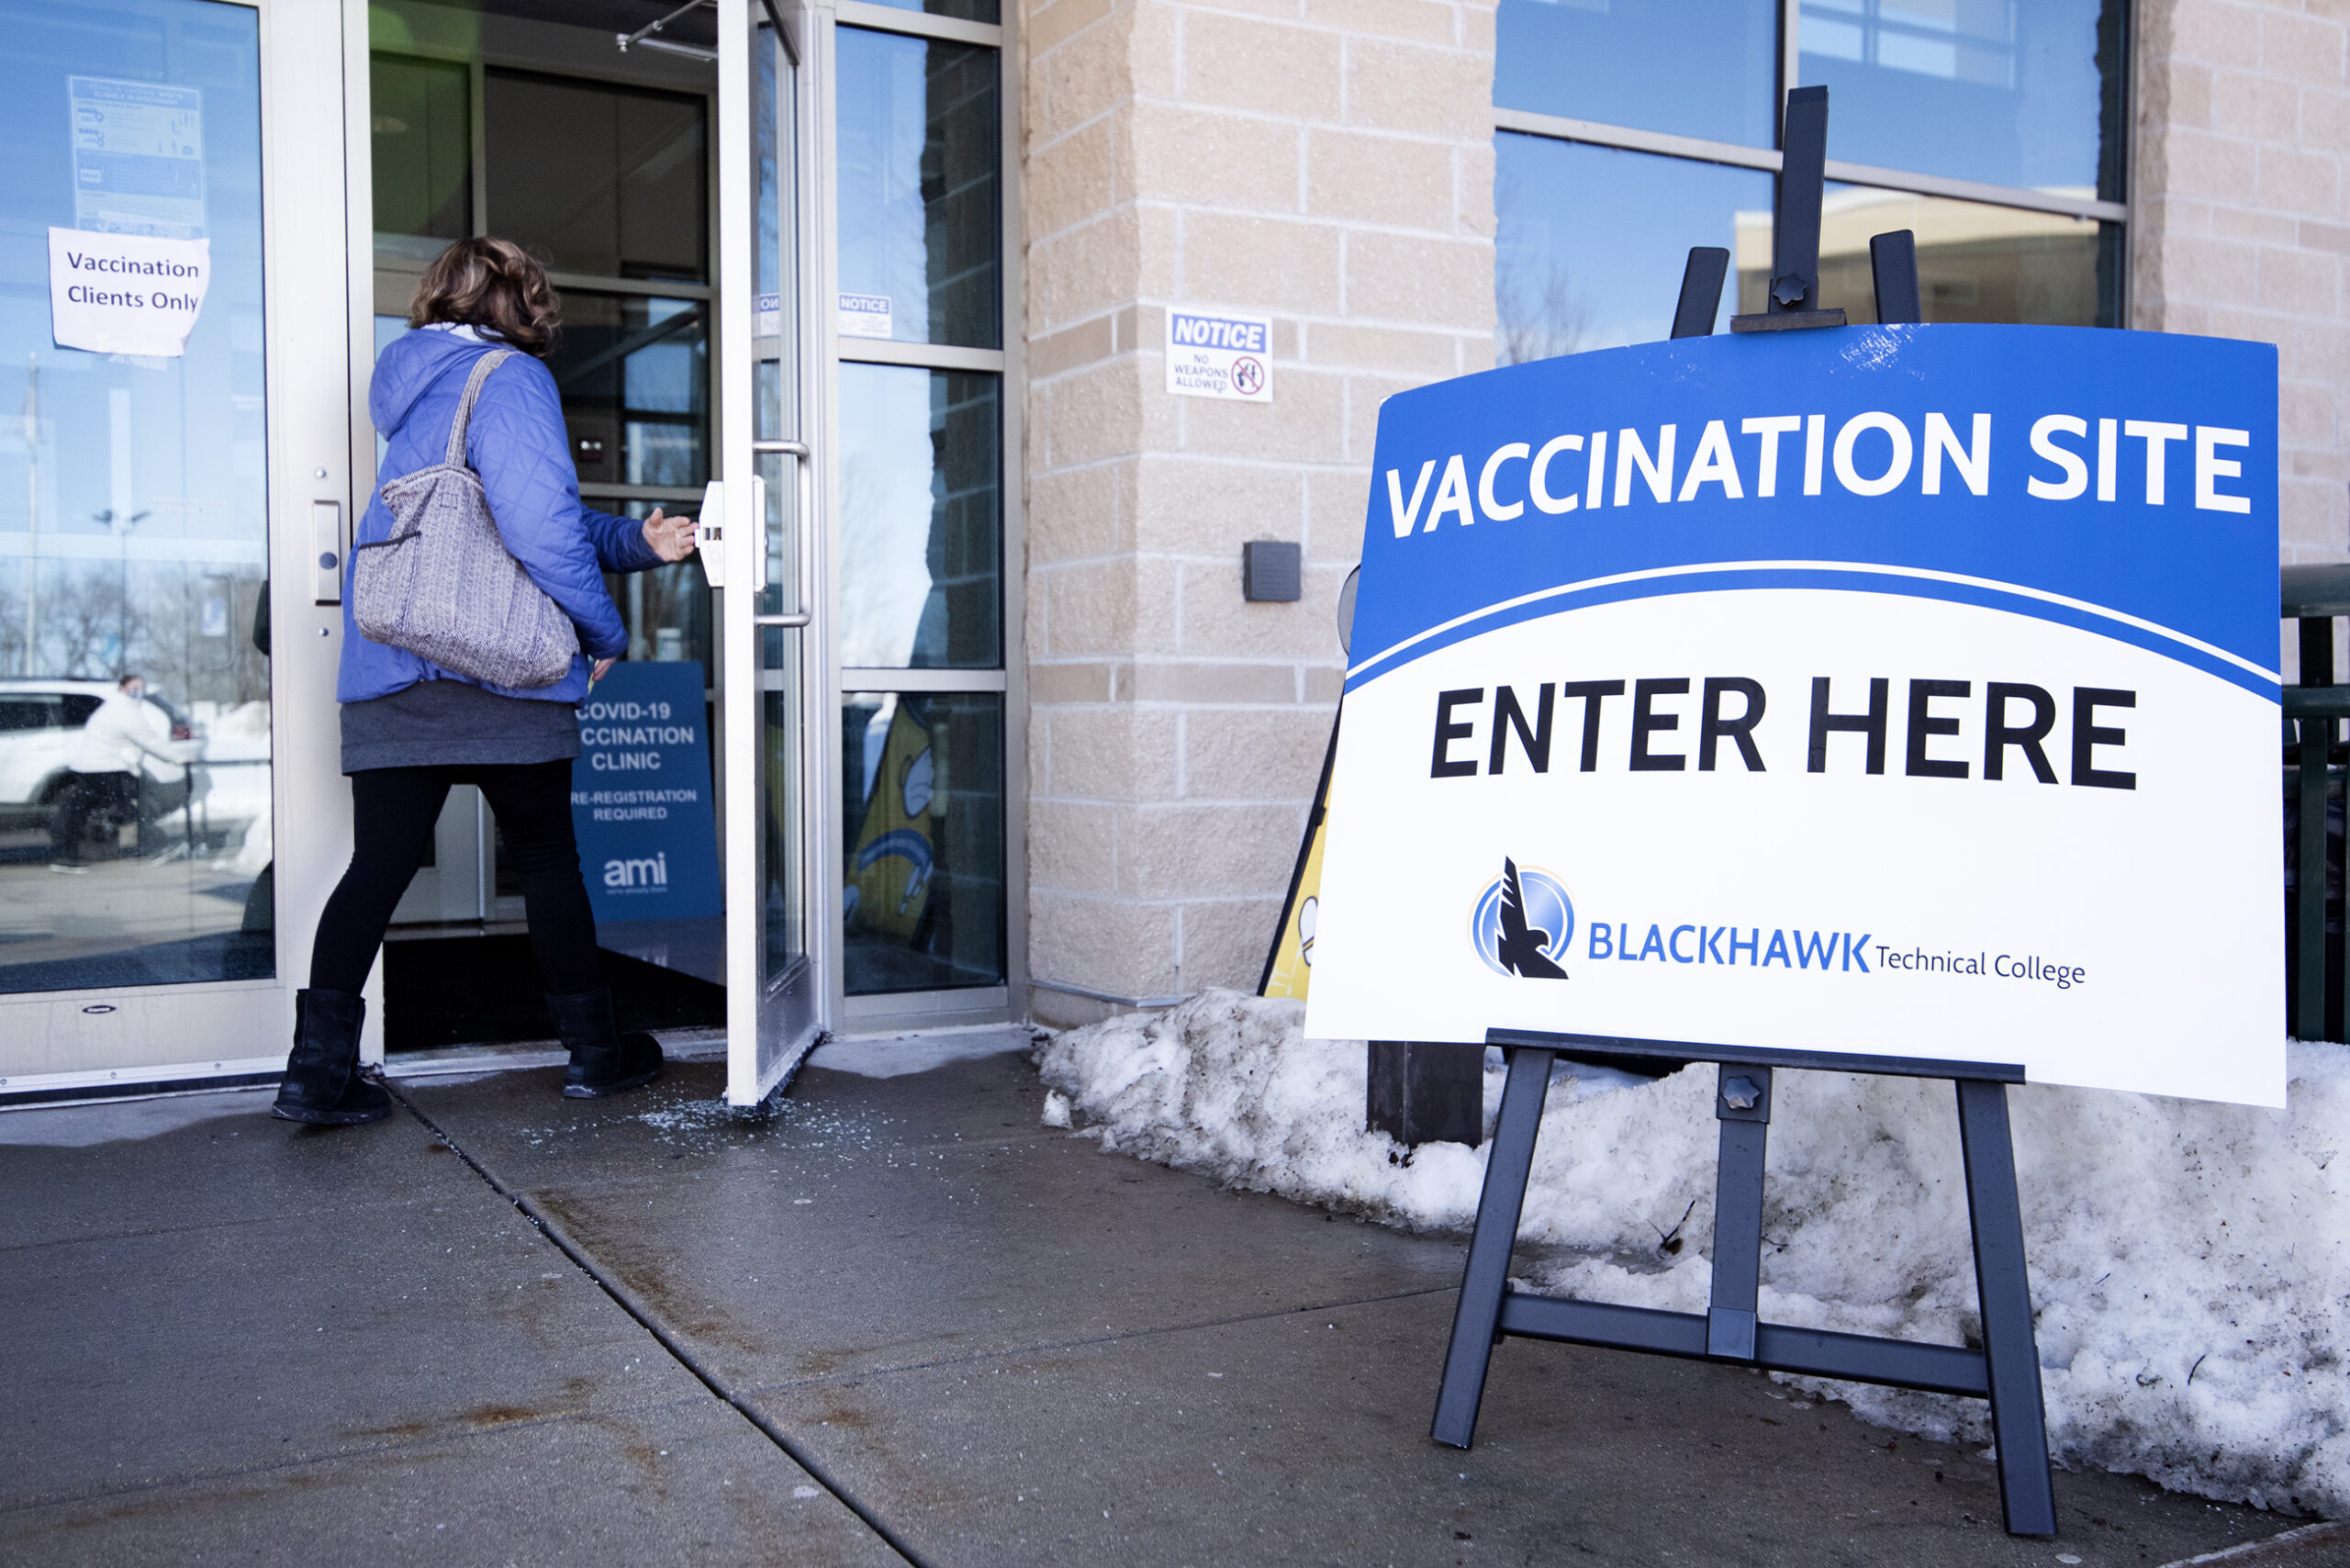 A person in a coat enters through glass doors near a sign that says "Vaccination Site, Enter Here."